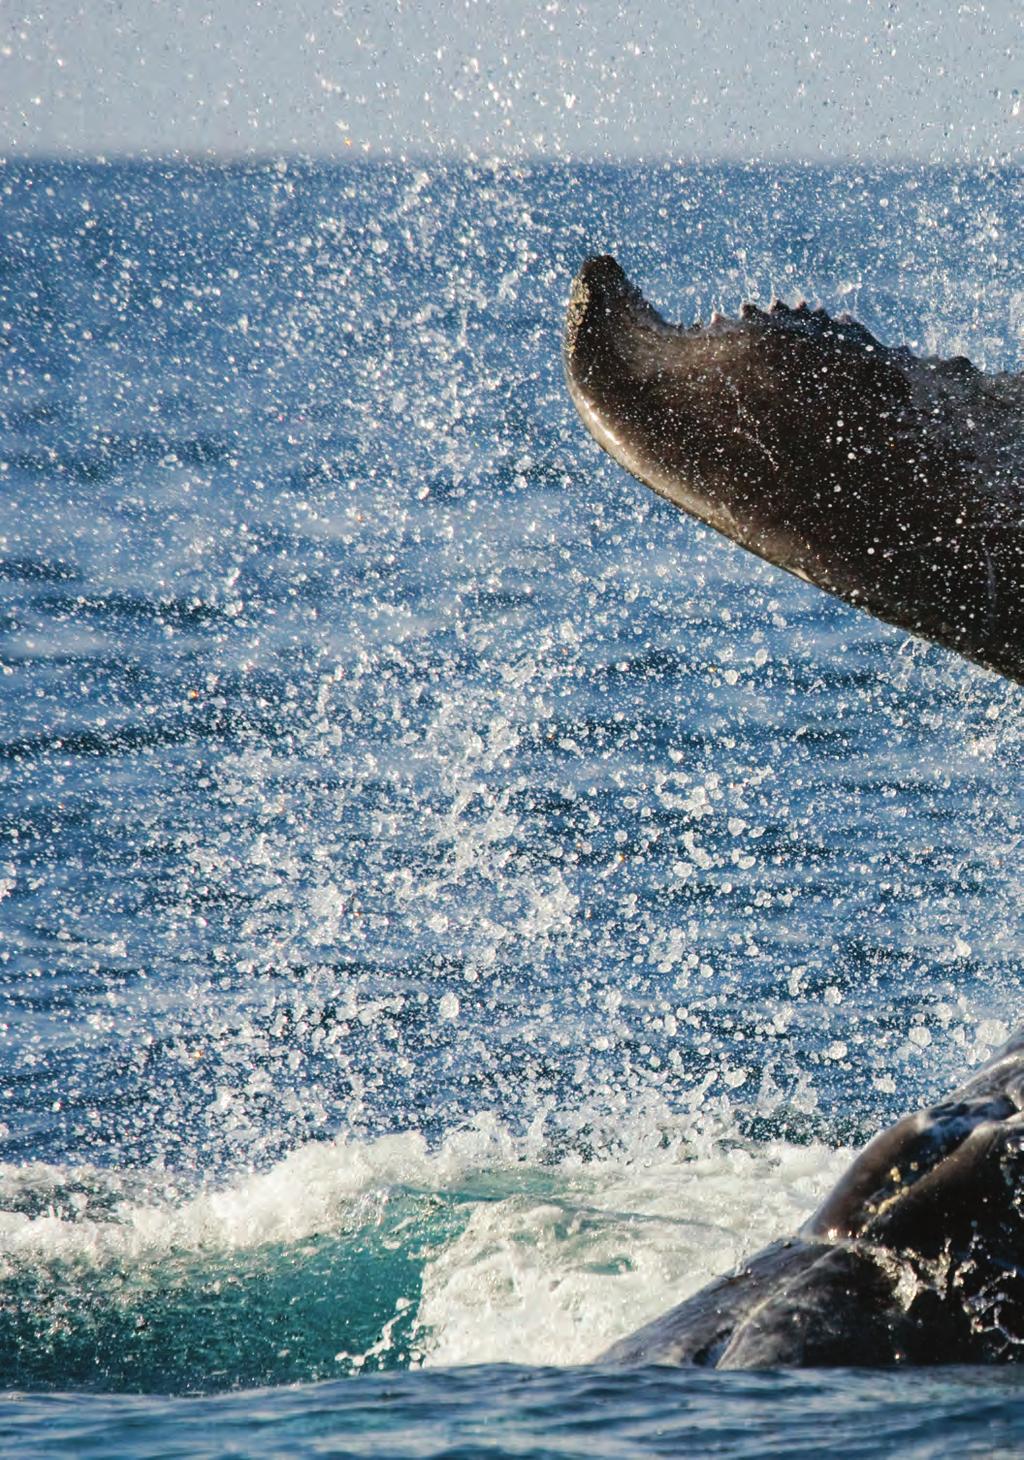 Dana Point is fortunate to have whales year-round, and the highest concentration of endangered Blue